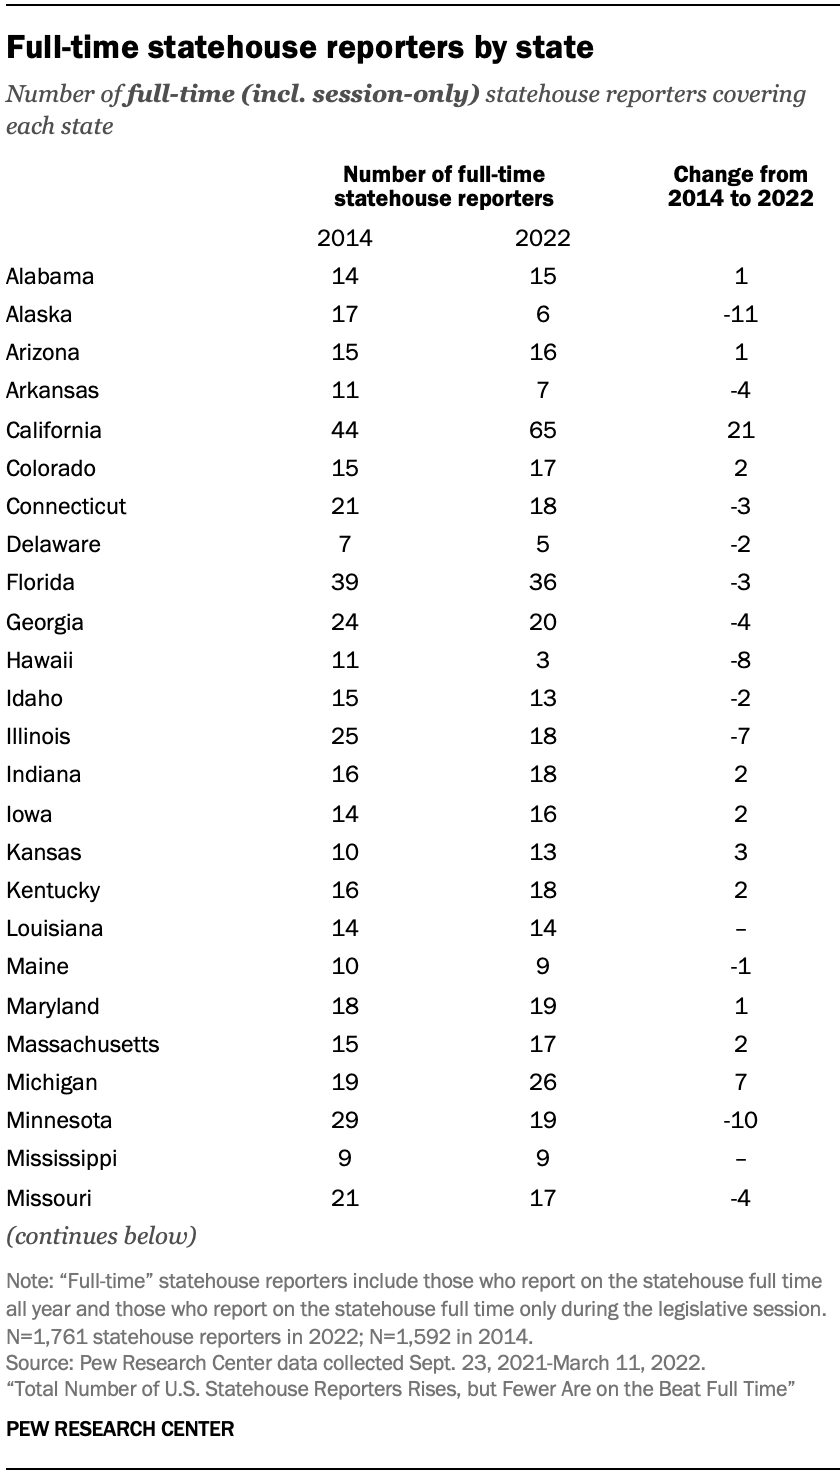 Full-time statehouse reporters by state